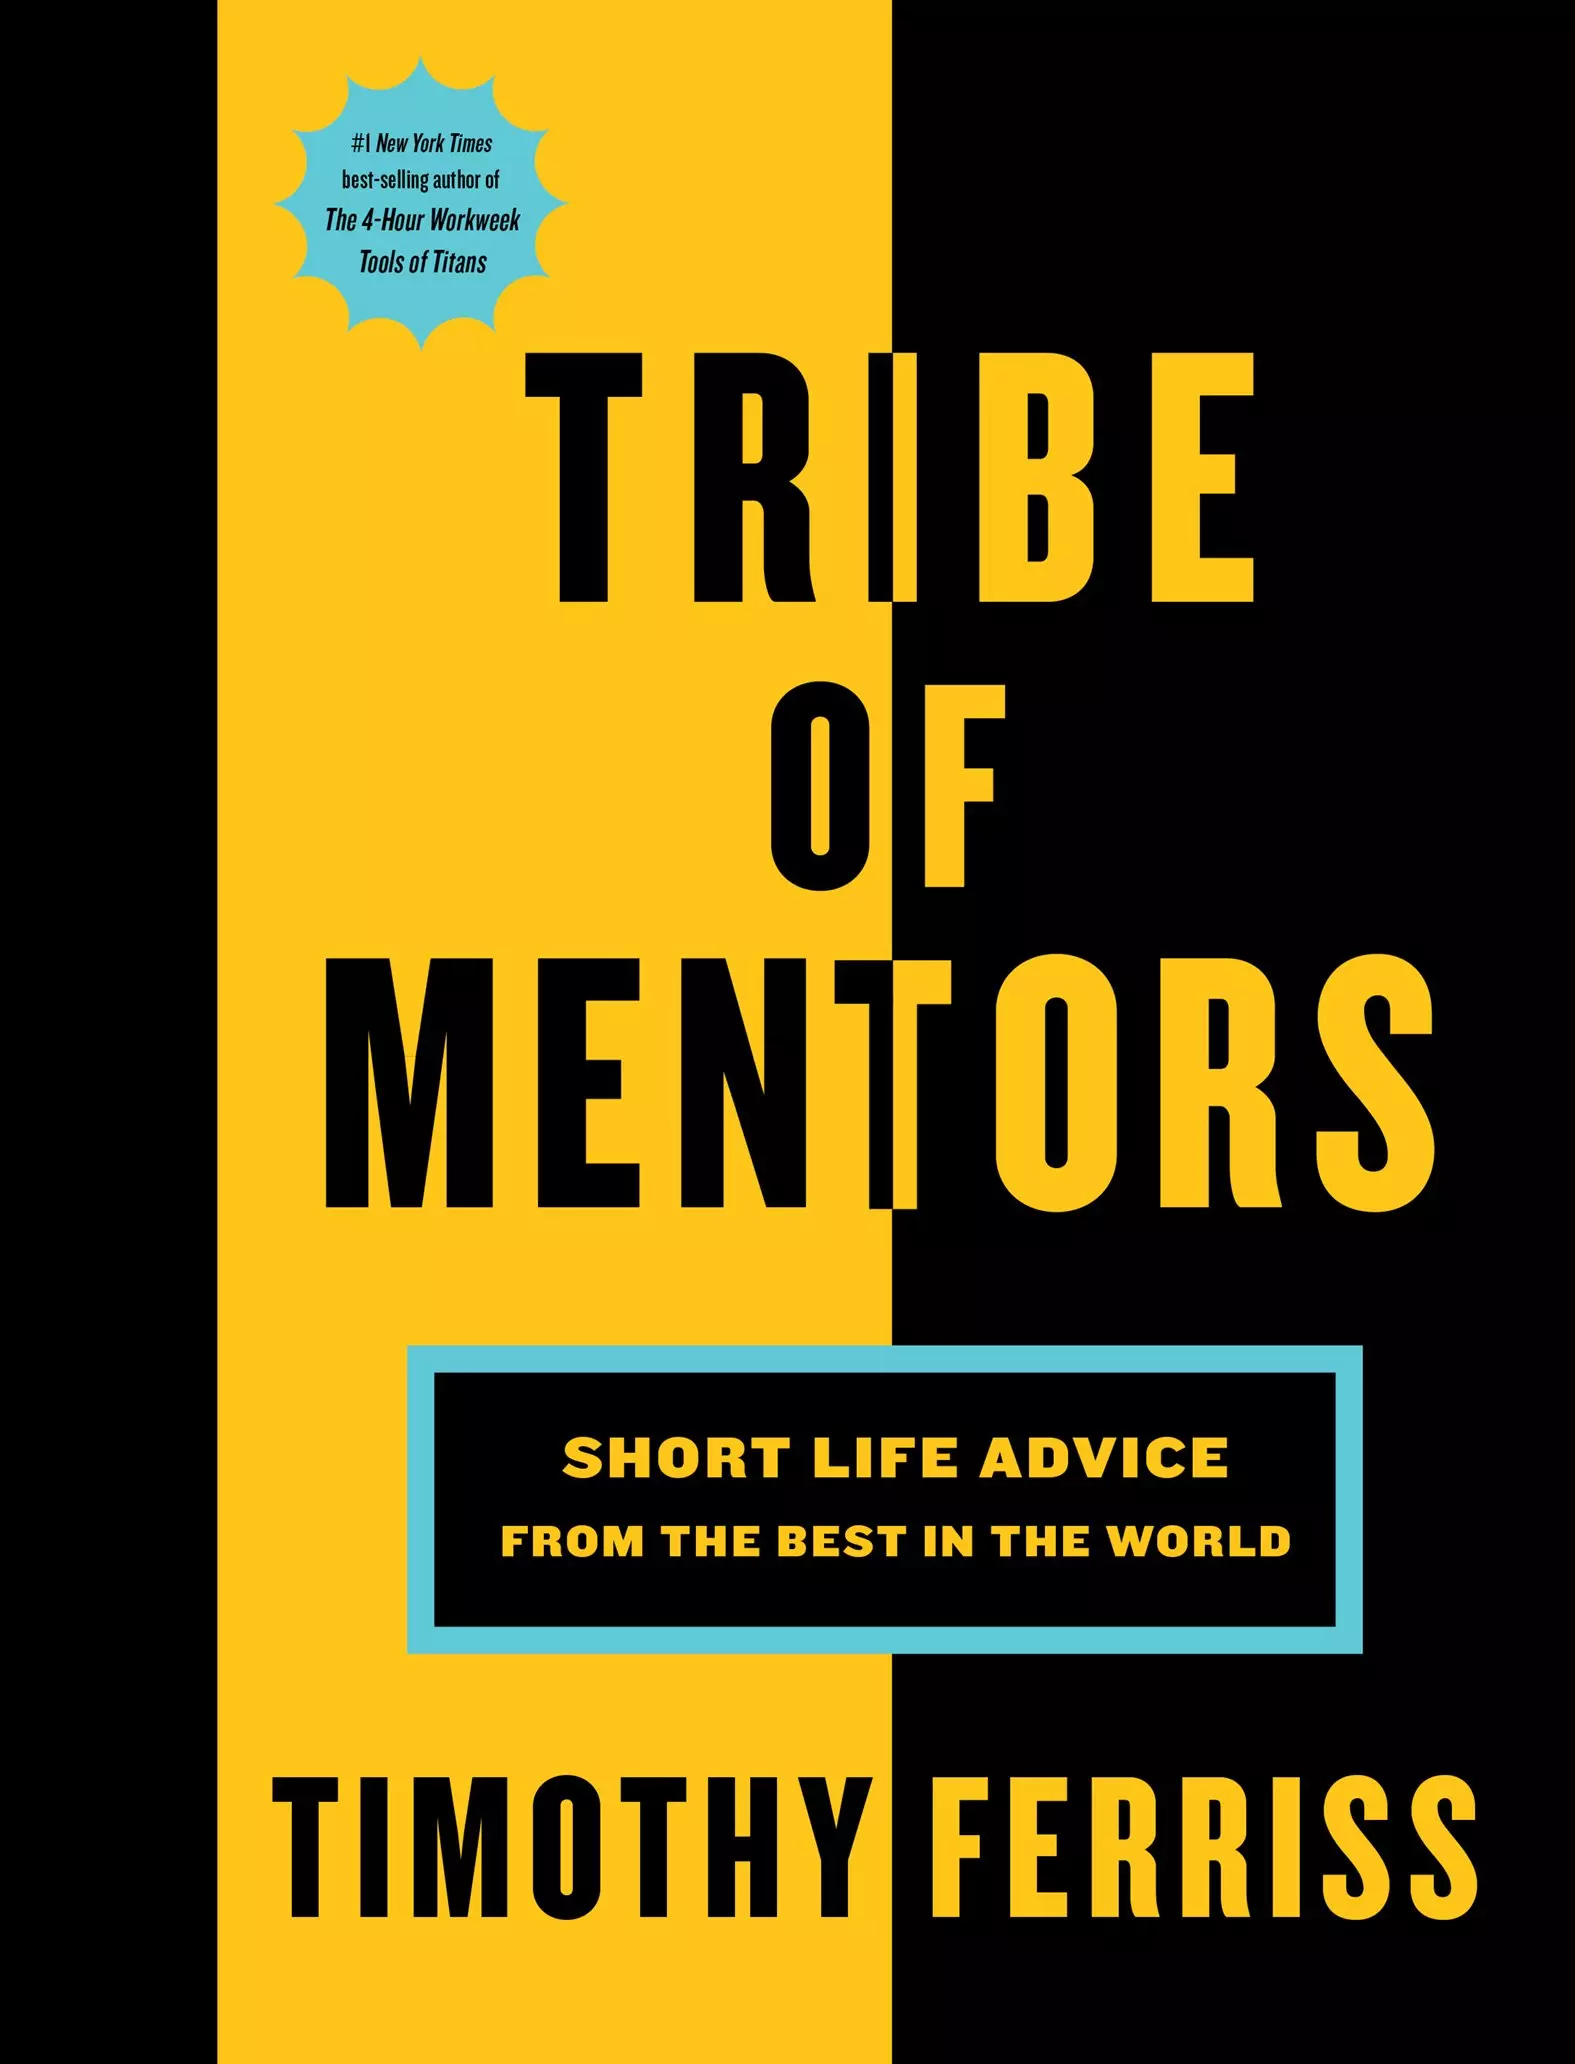 Tribe_of_Mentors-_Short_Life_Advice_from_the_Best_in_the_World_Book.jpg